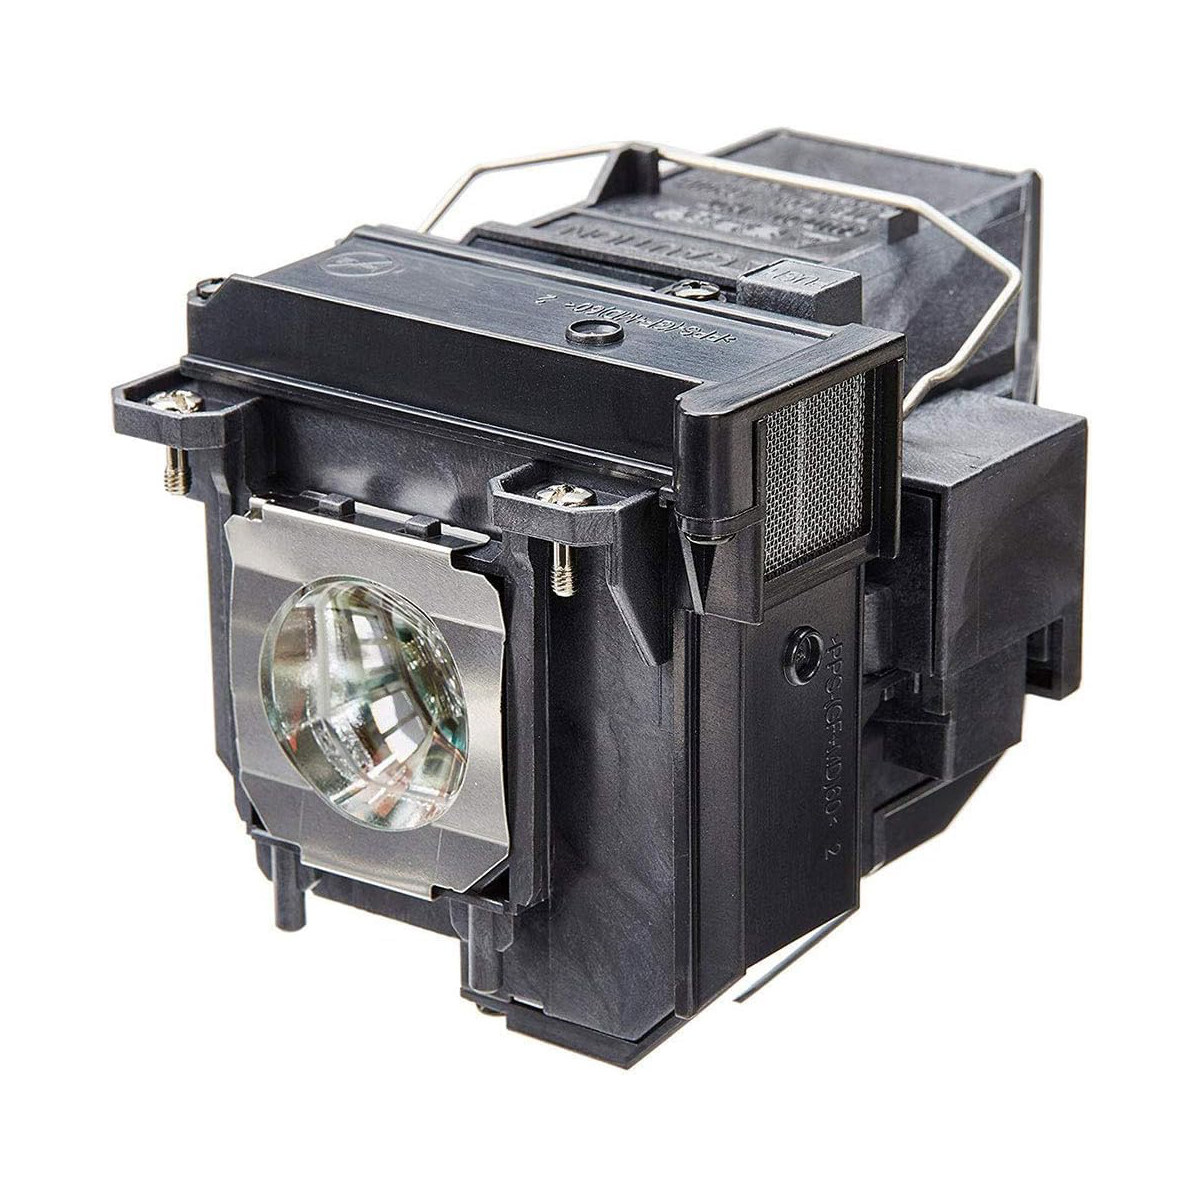 Replacement Projector lamp ELPLP71 For Epson EB-1400Wi EB-1410Wi EB-470 EB-475W